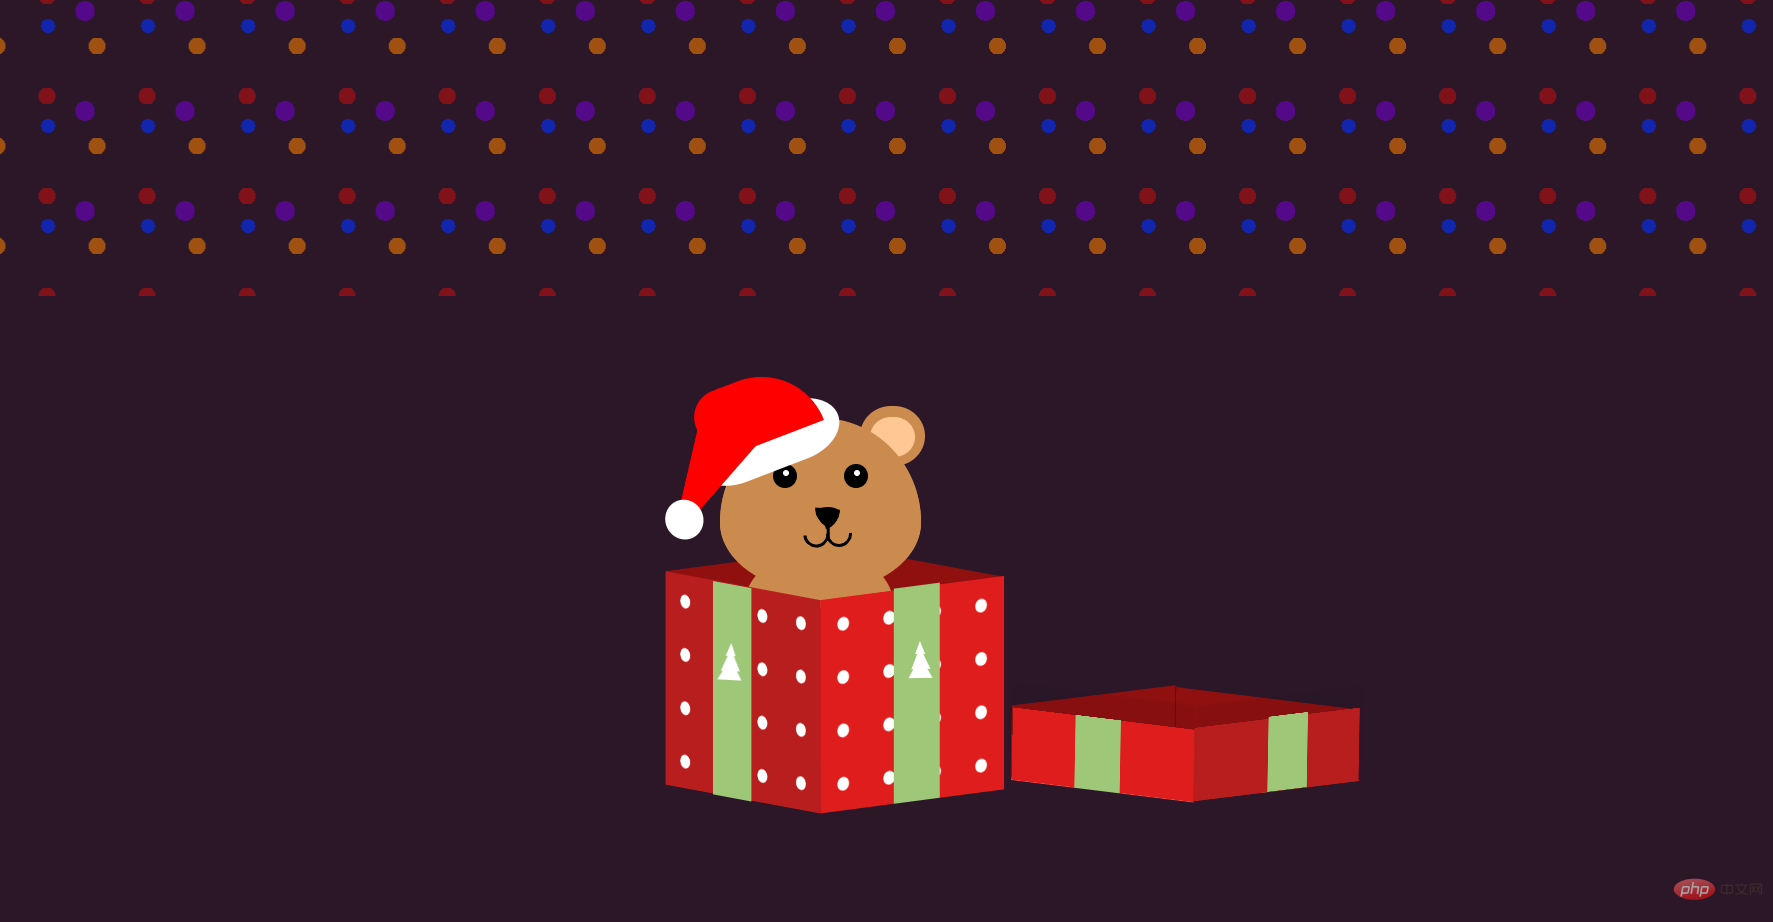 Ten cool Christmas code effects for programmers [Free download]